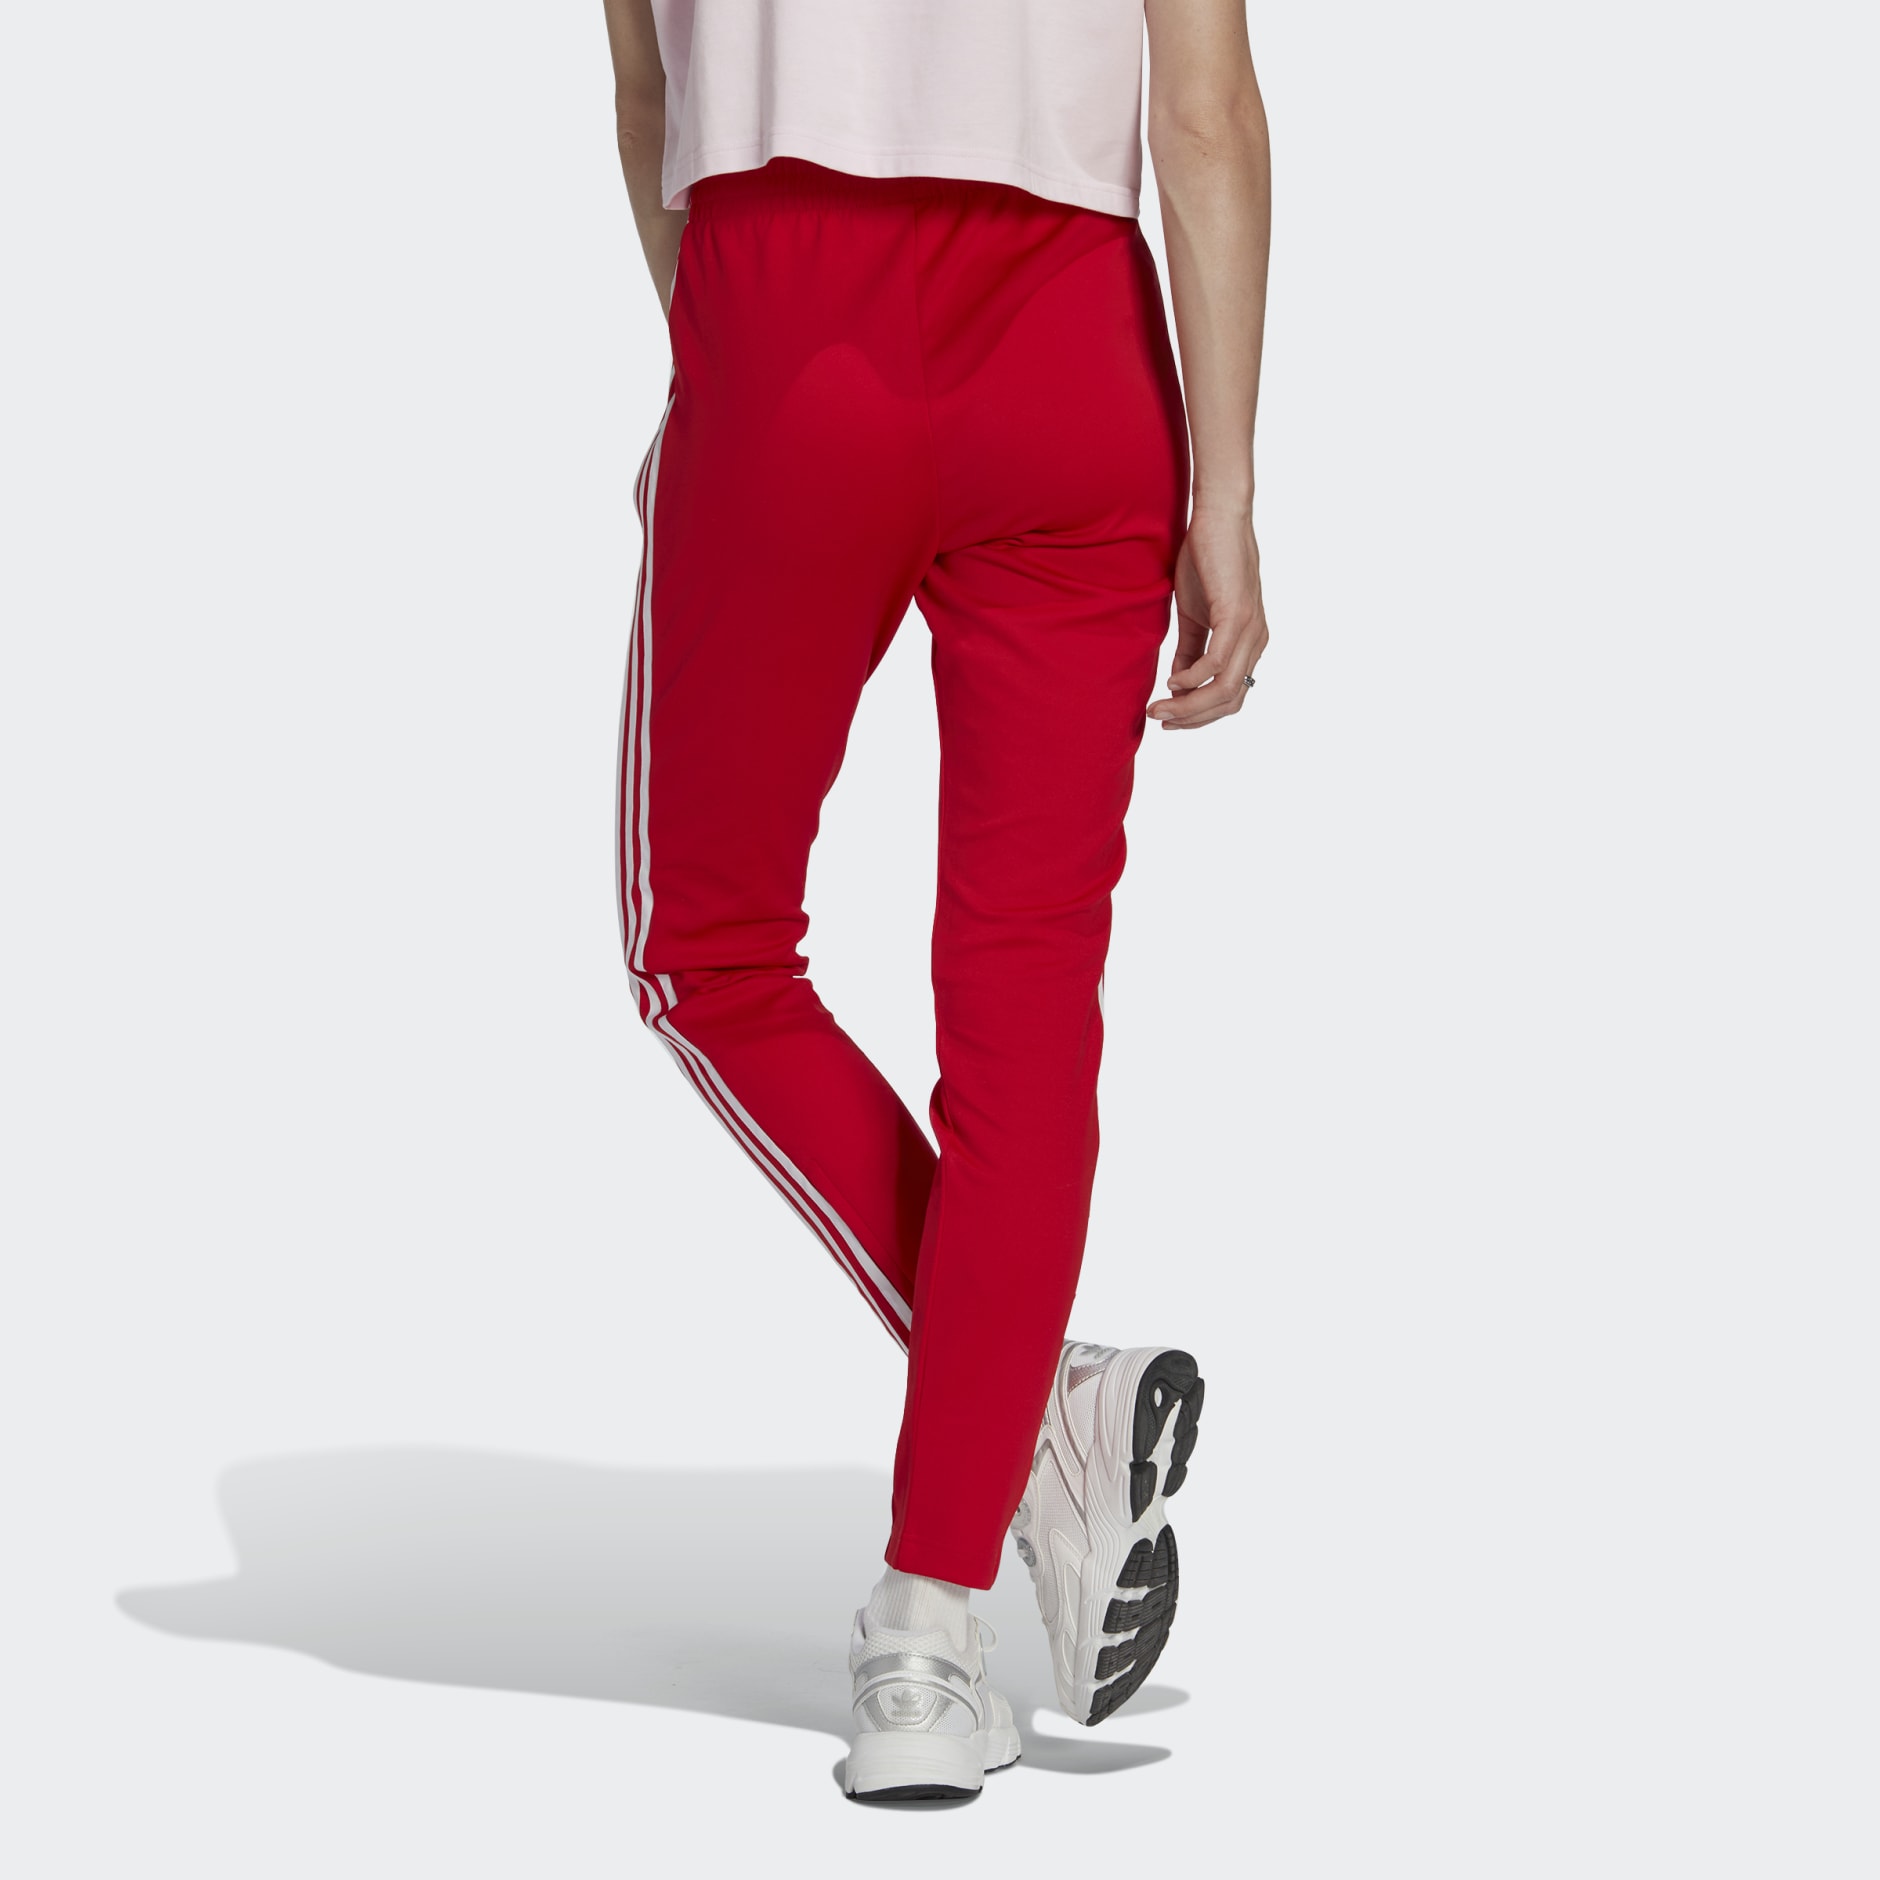 Women's Clothing - Adicolor SST Track Pants - Red